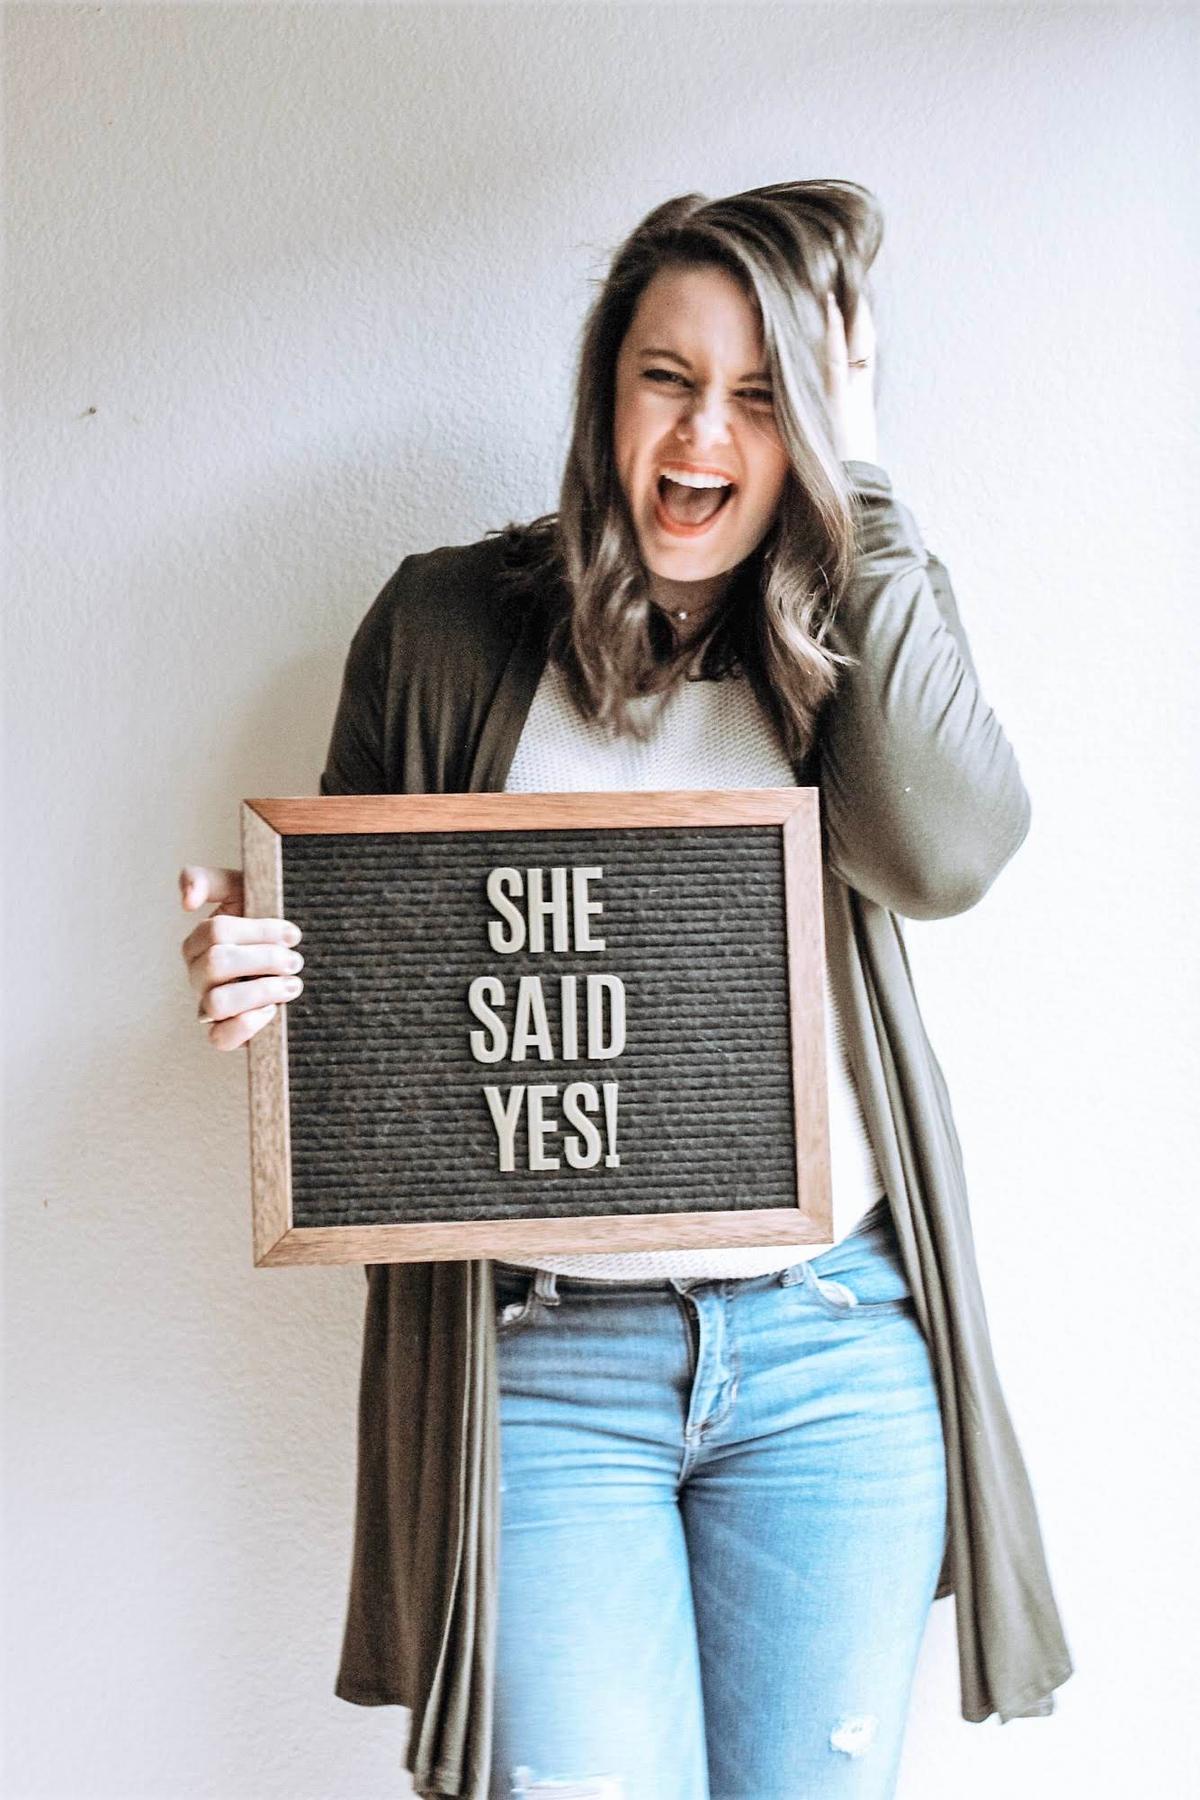 Taryn holding a sign reading "She Said Yes" at her sister-in-law's house in January 2019 after accepting a job at a preschool for children with special needs. (Photo courtesy of Taryn Logan)